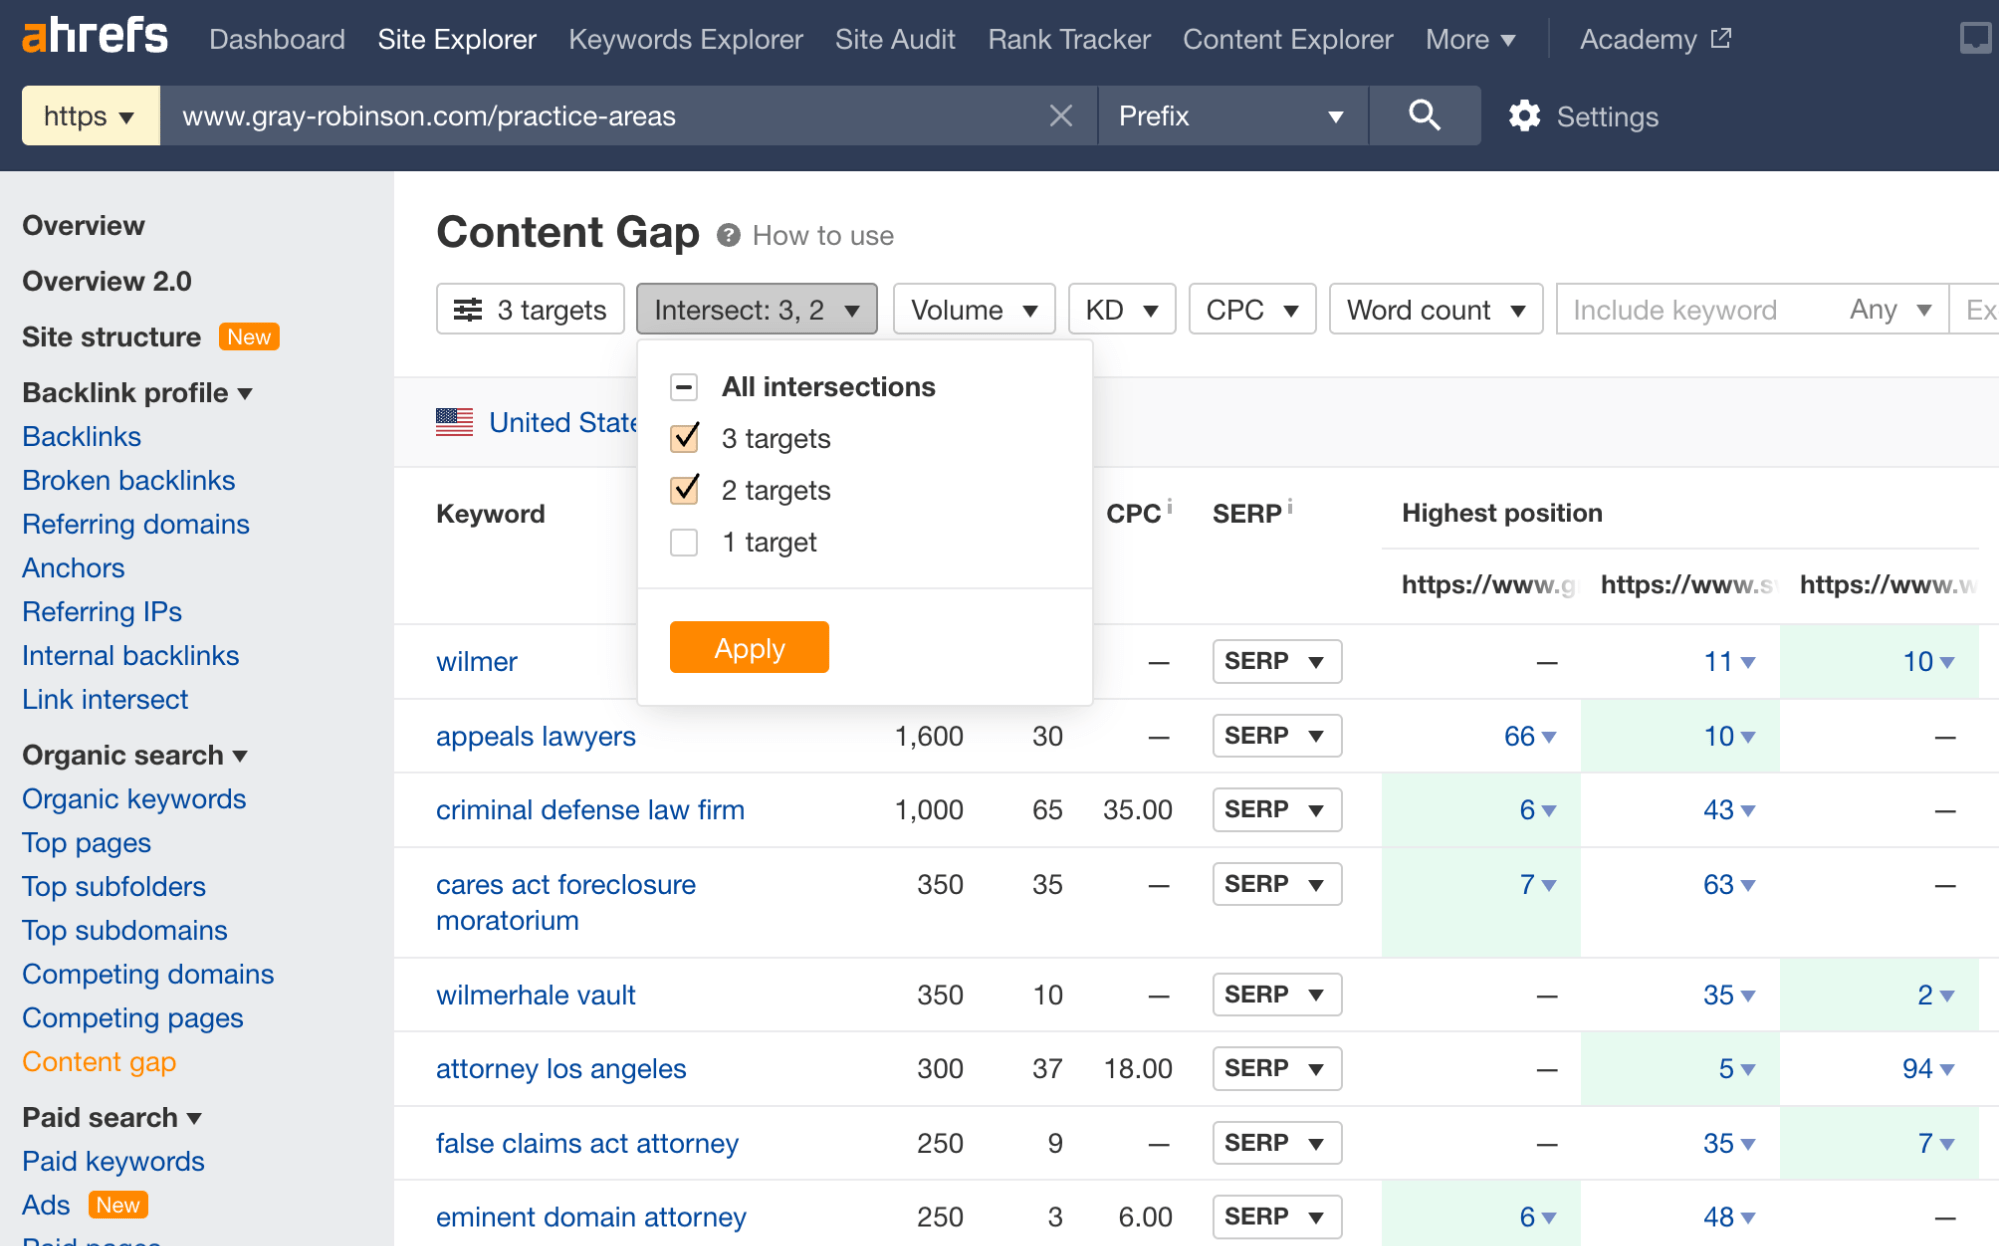 Content Gap report results